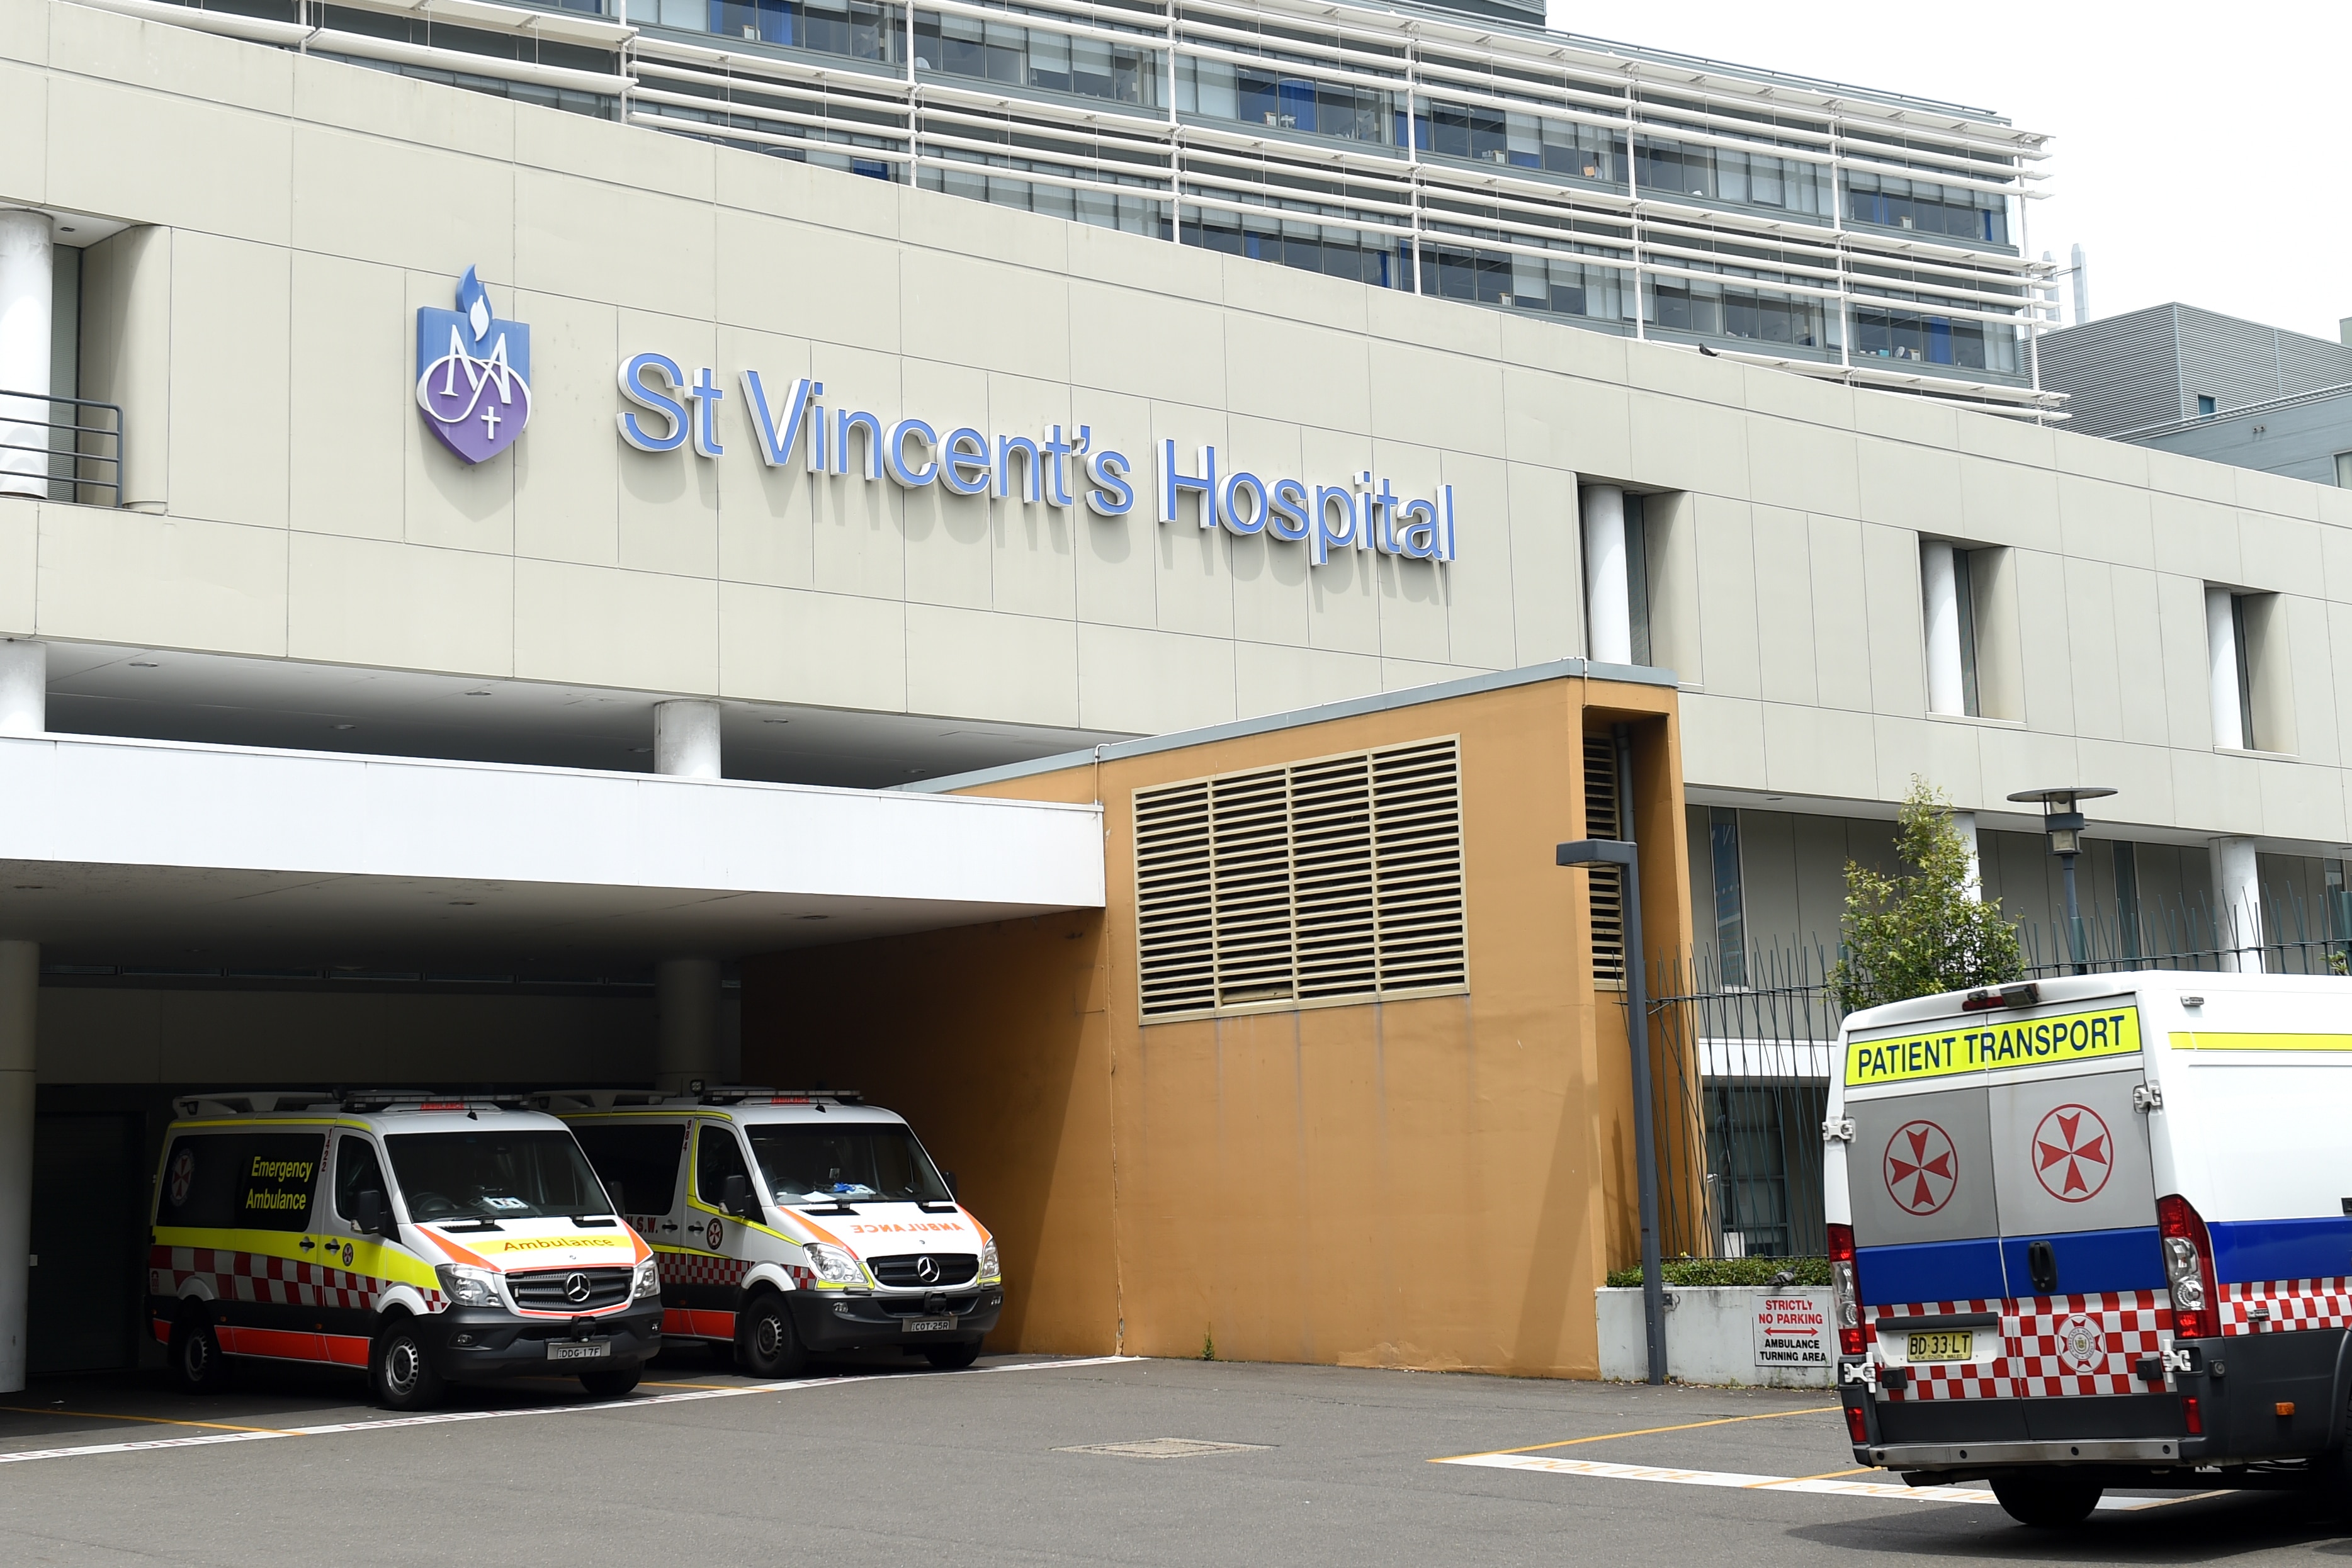 A man later confirmed to have coronavirus visited the emergency department at St Vincent's Hospital in Sydney on Friday.